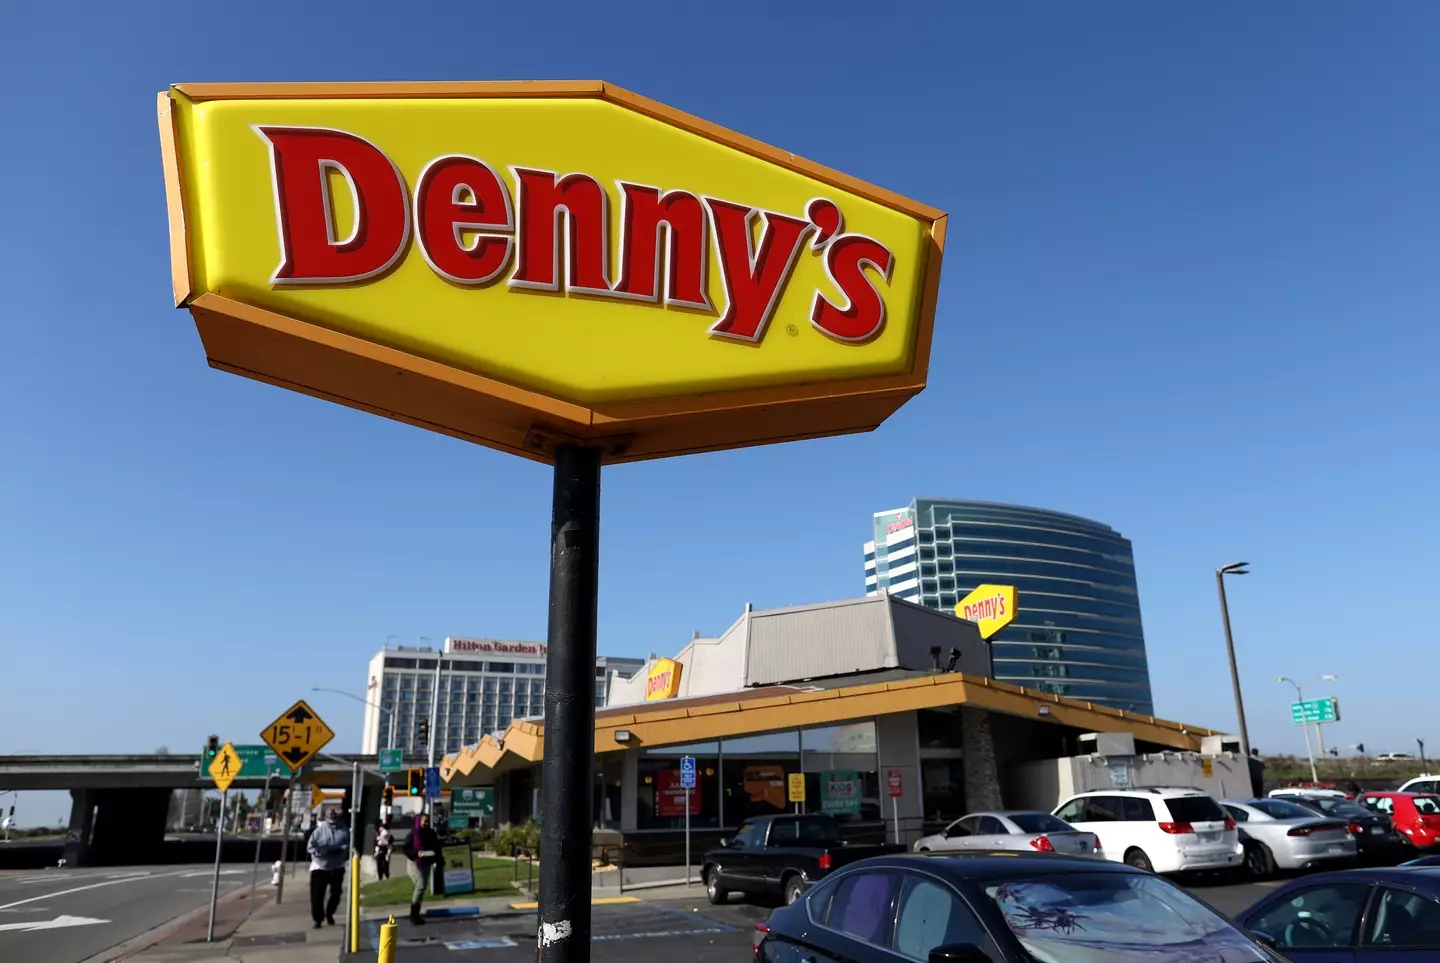 It appears as if Denny's was moonlighting as smaller eateries.